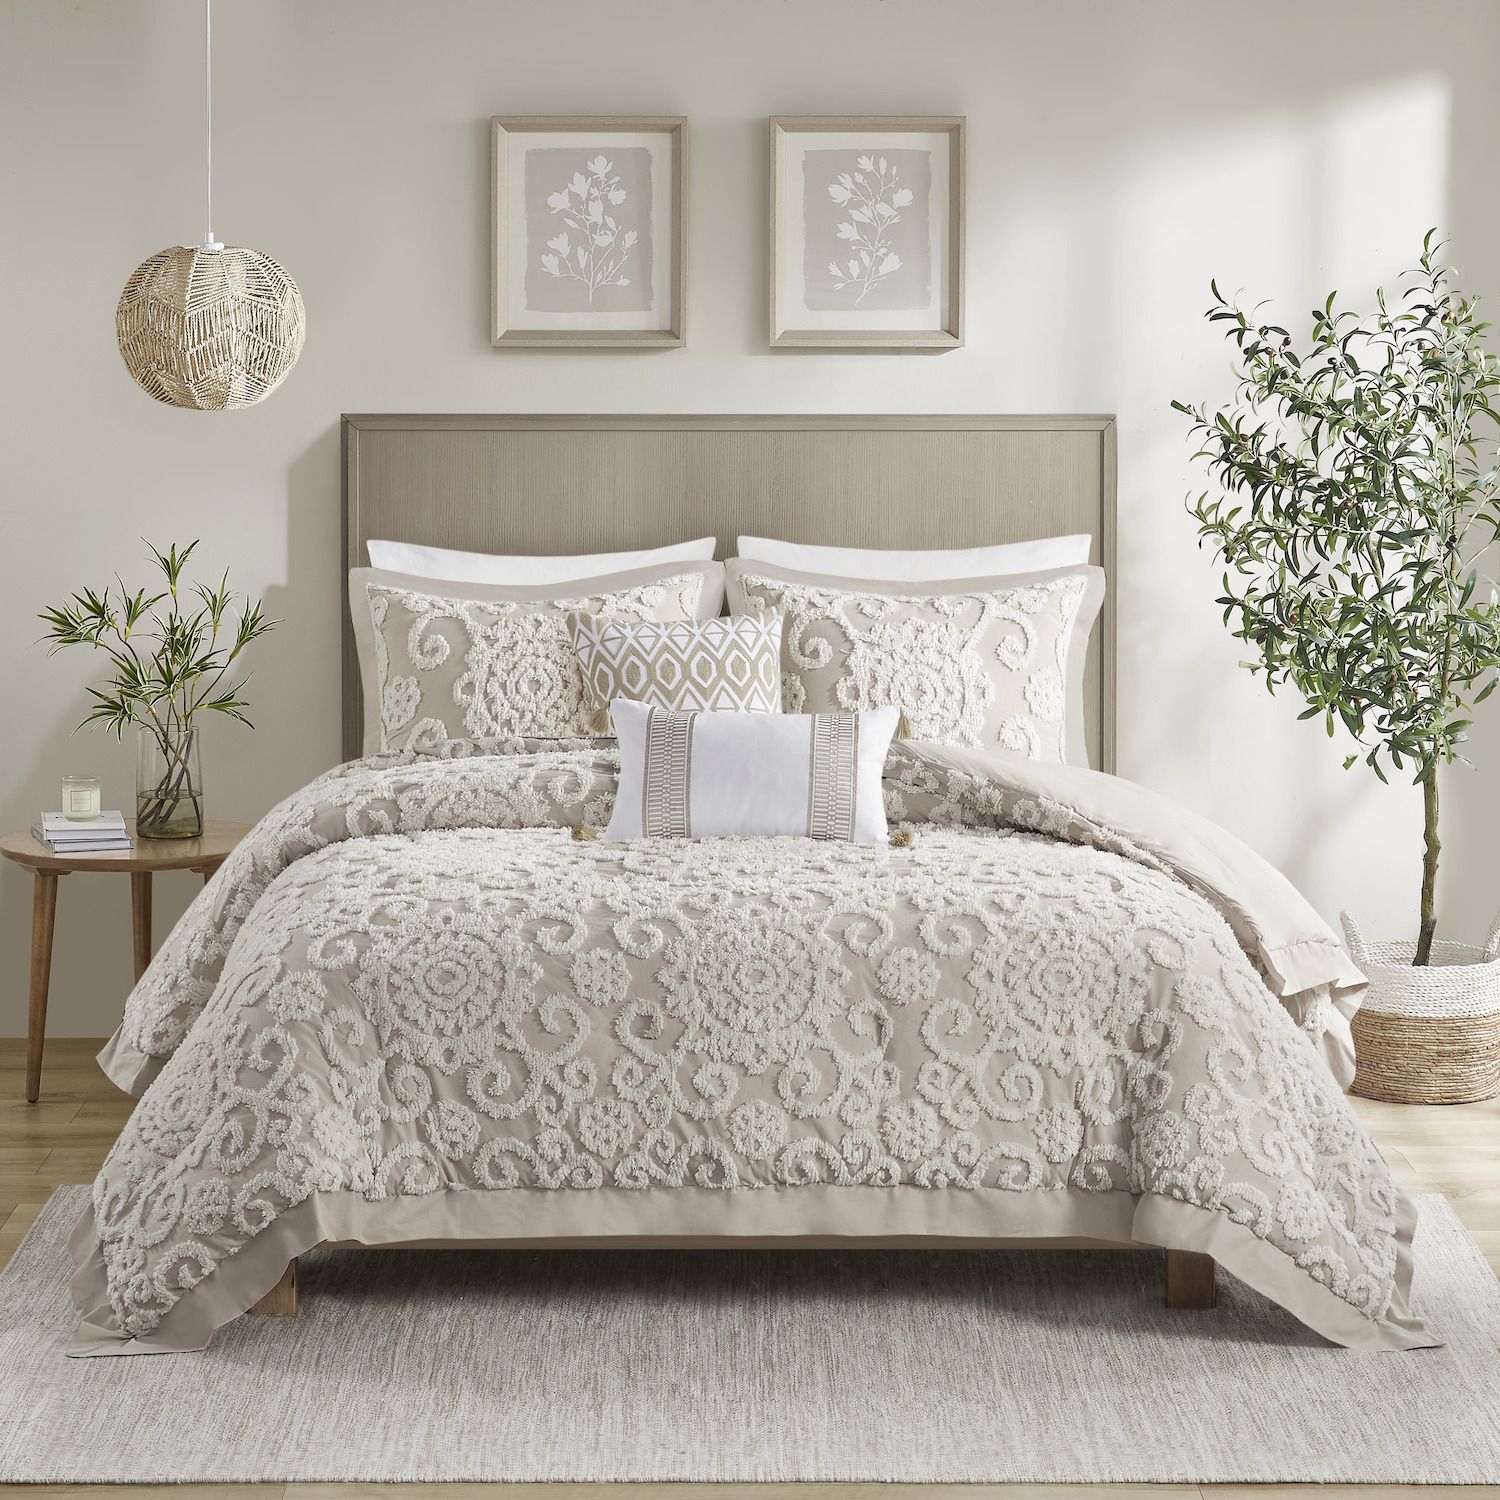 Image for Harbor House Suzanna 3-pc. Comforter Set at Kohl's.